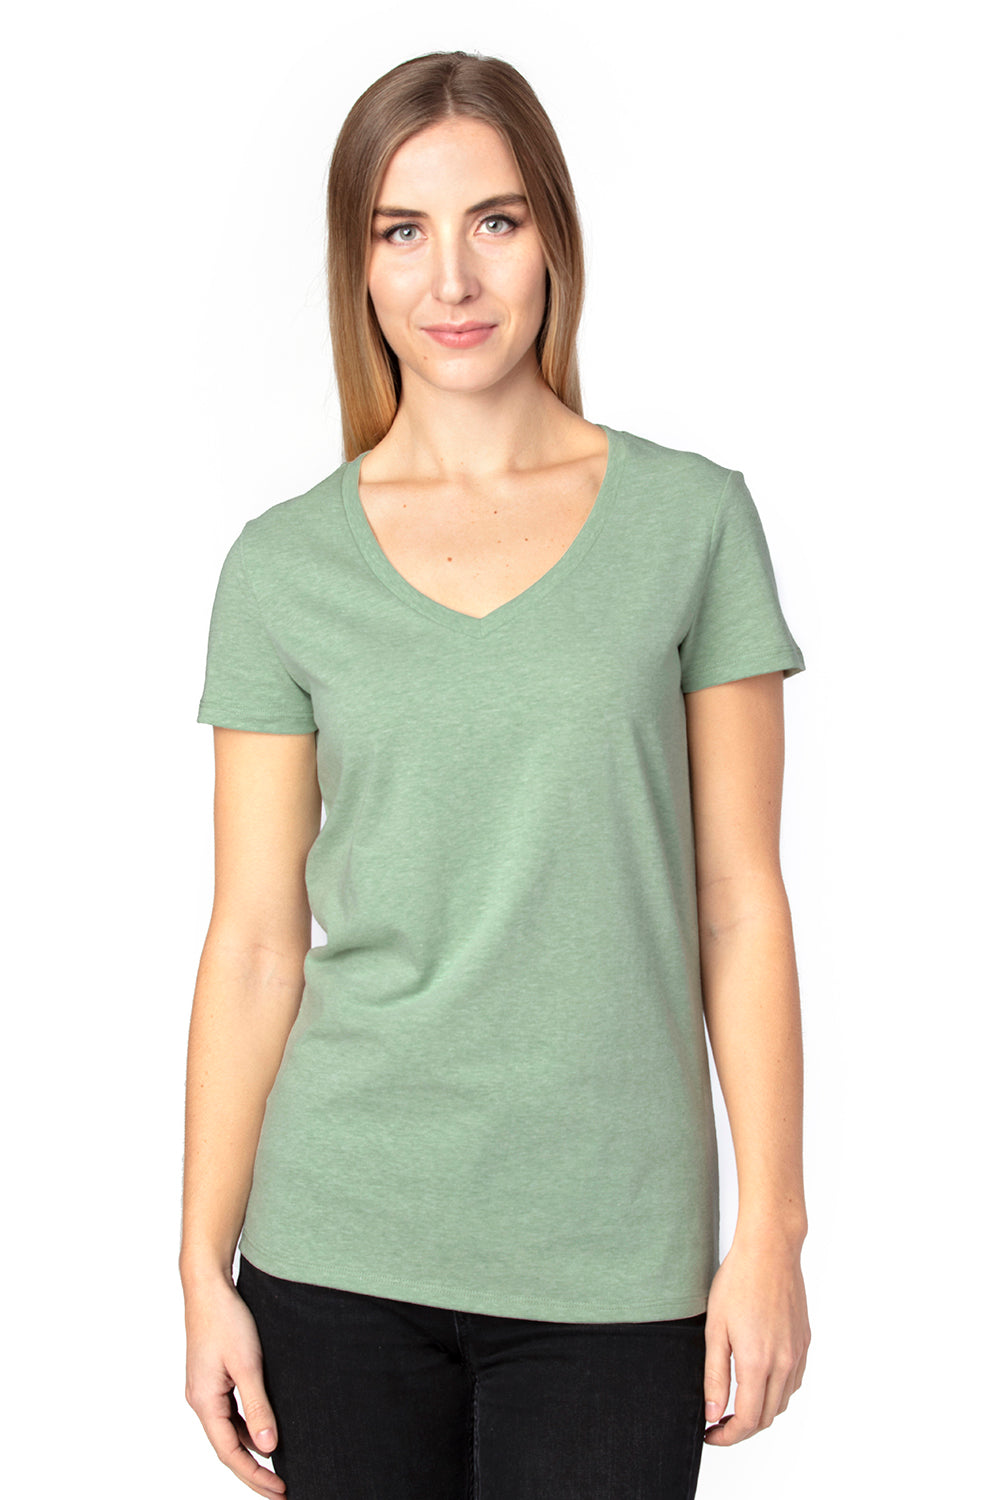 Threadfast Apparel 200RV Womens Ultimate Short Sleeve V-Neck T-Shirt Heather Army Green Front